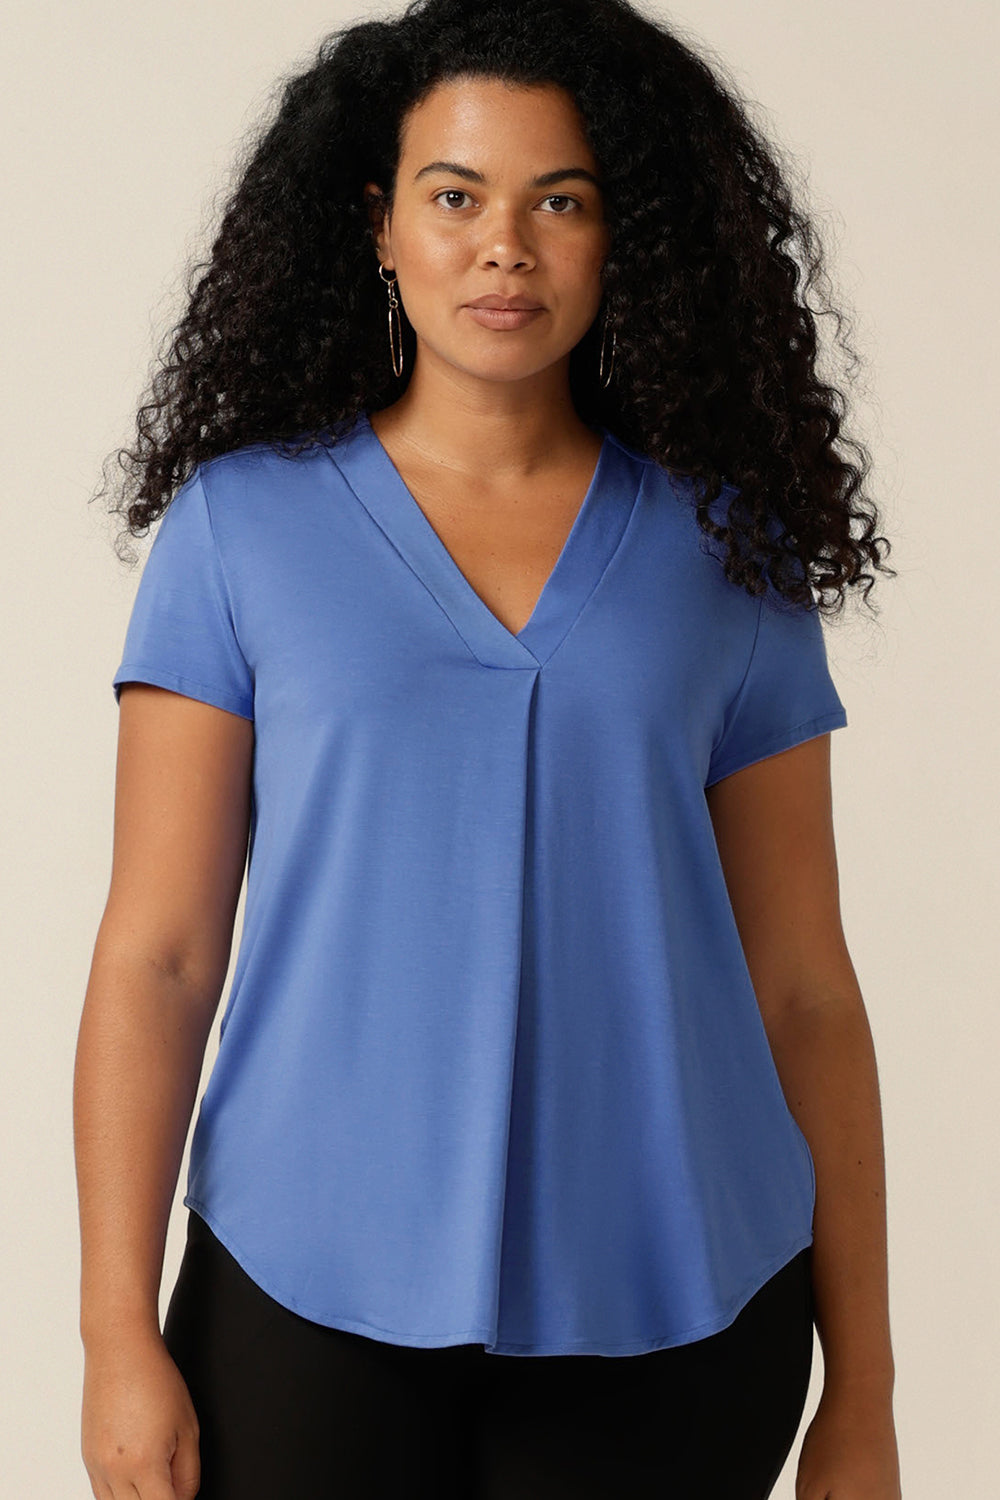 A curvy size 12 woman wears a short-sleeved V-neck top in bamboo jersey. Lightweight, breathable and made from natural fibres, bamboo jersey makes for a comfortable and cool jersey top. Made from sustainable fibres and Australian-made, this women's bamboo jersey top highlights 2 way L&F clothing is working towards producing more eco-conscious, sustainable fashion